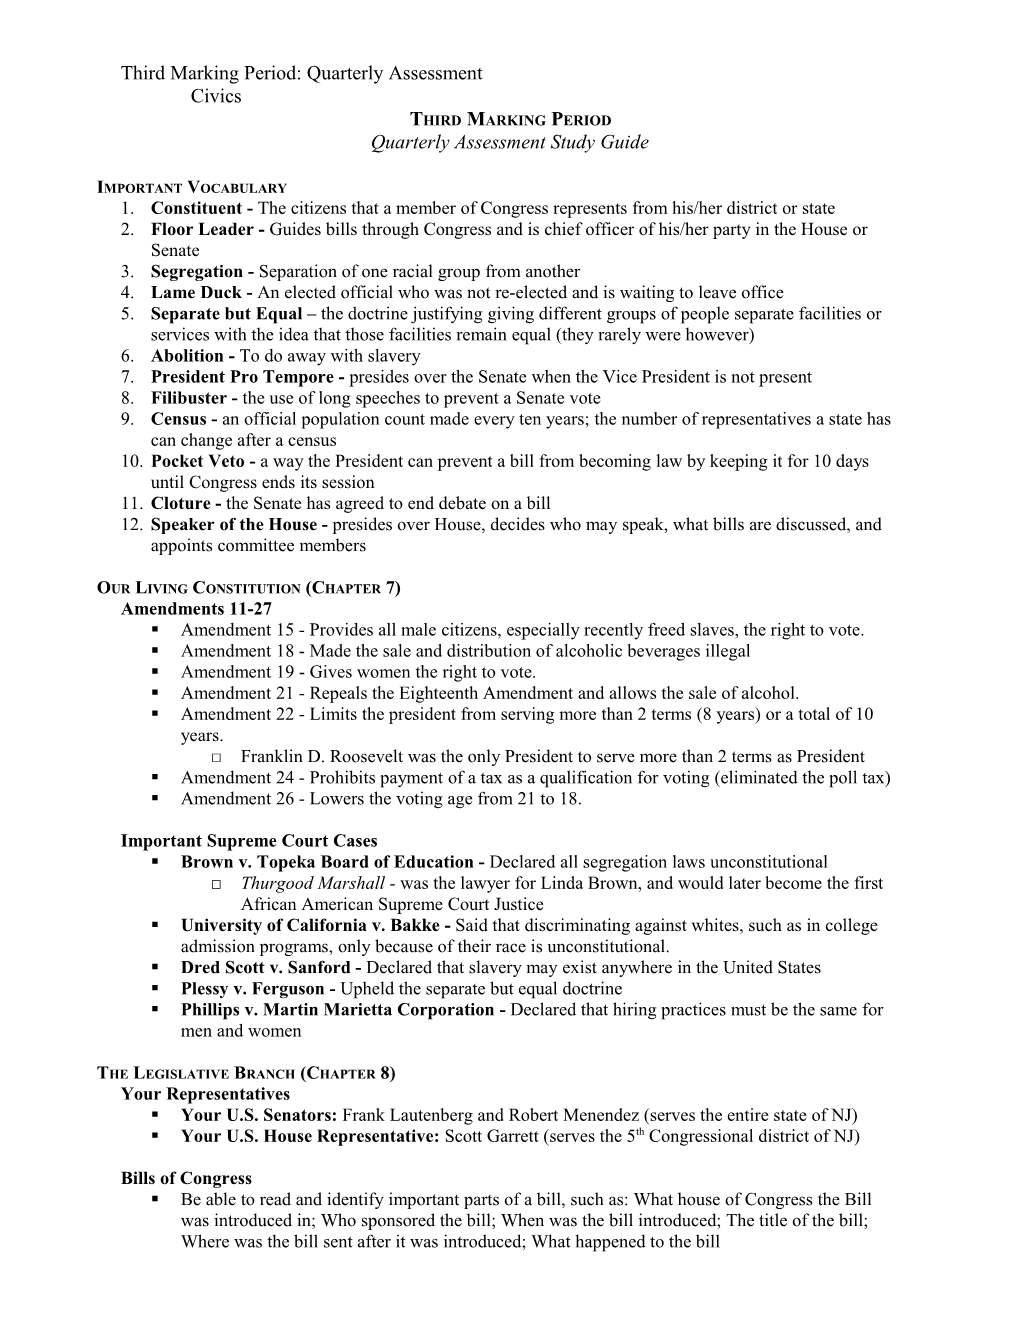 Third Marking Period Quarterly Assessment Study Guide